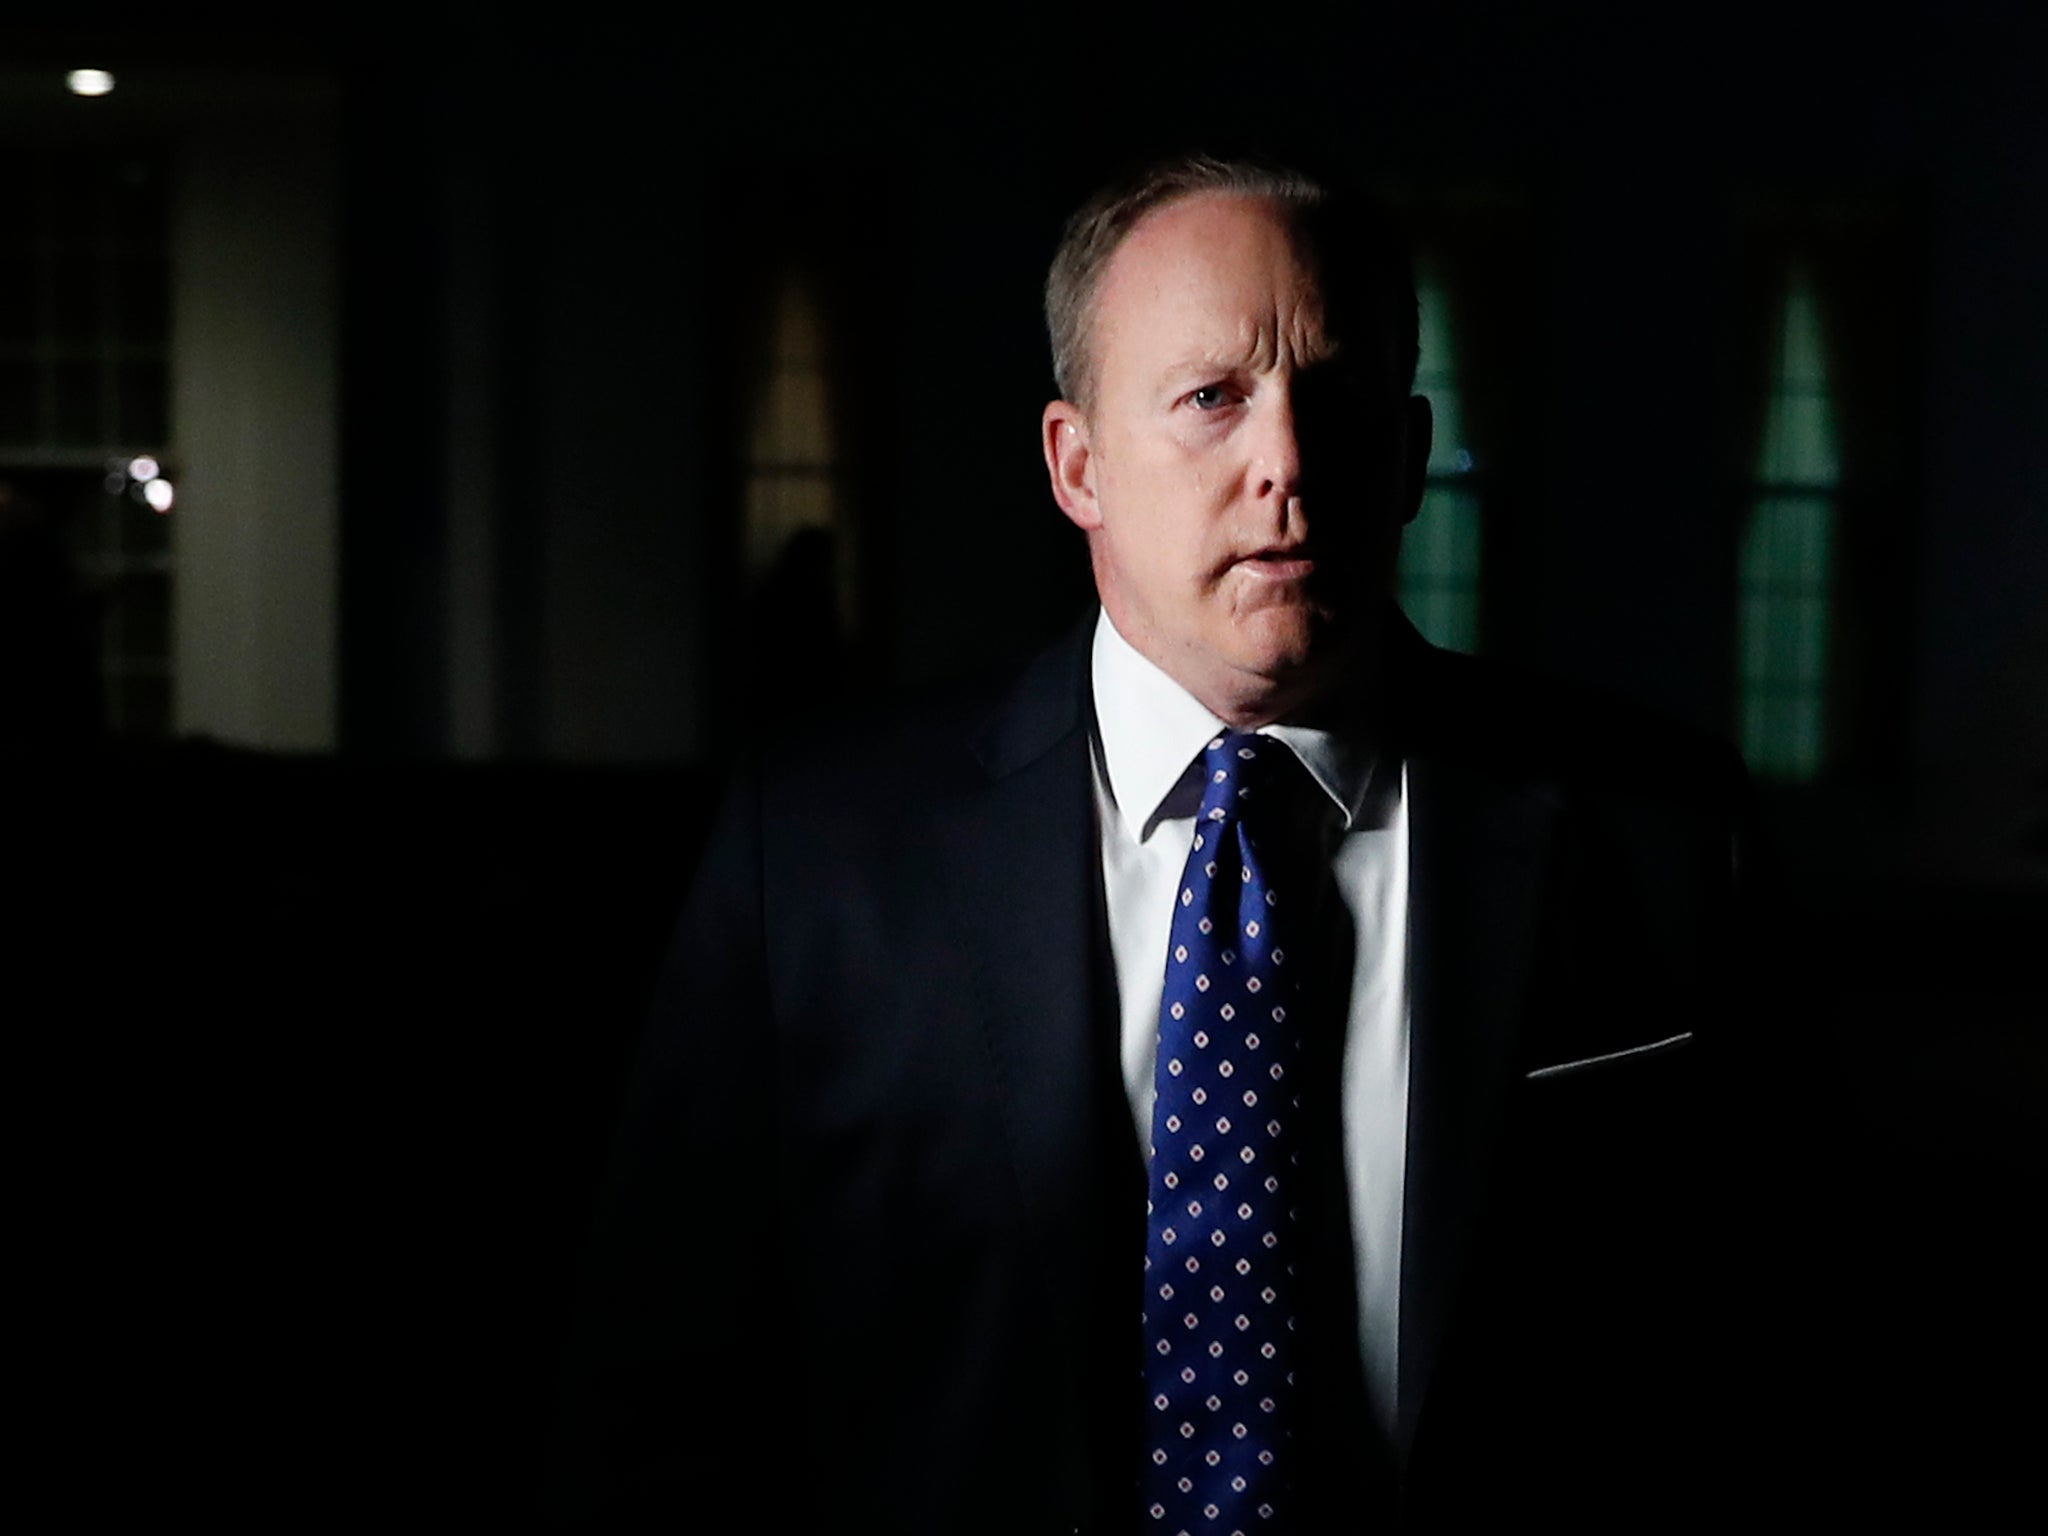 Mr Spicer is serving duty with the Navy Reserve, where he has served as a commander for almost twenty years, during his time off from press duties